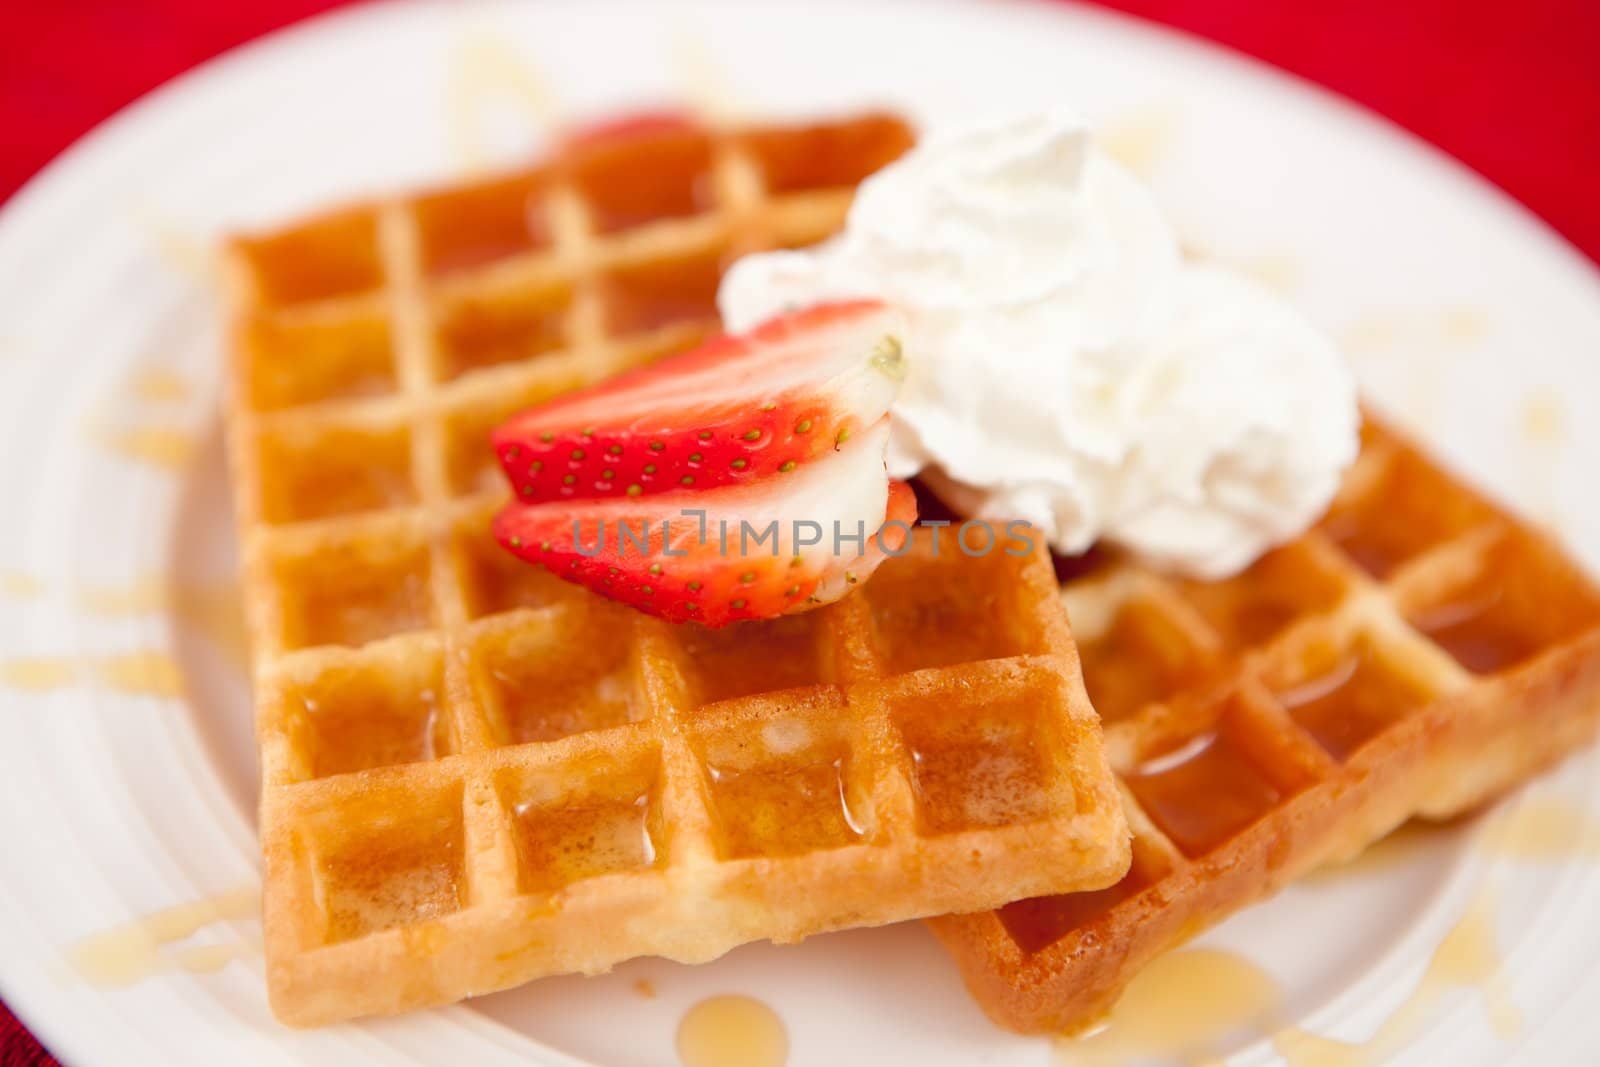 Waffles with whipped cream and strawberry and syrup on a white plate